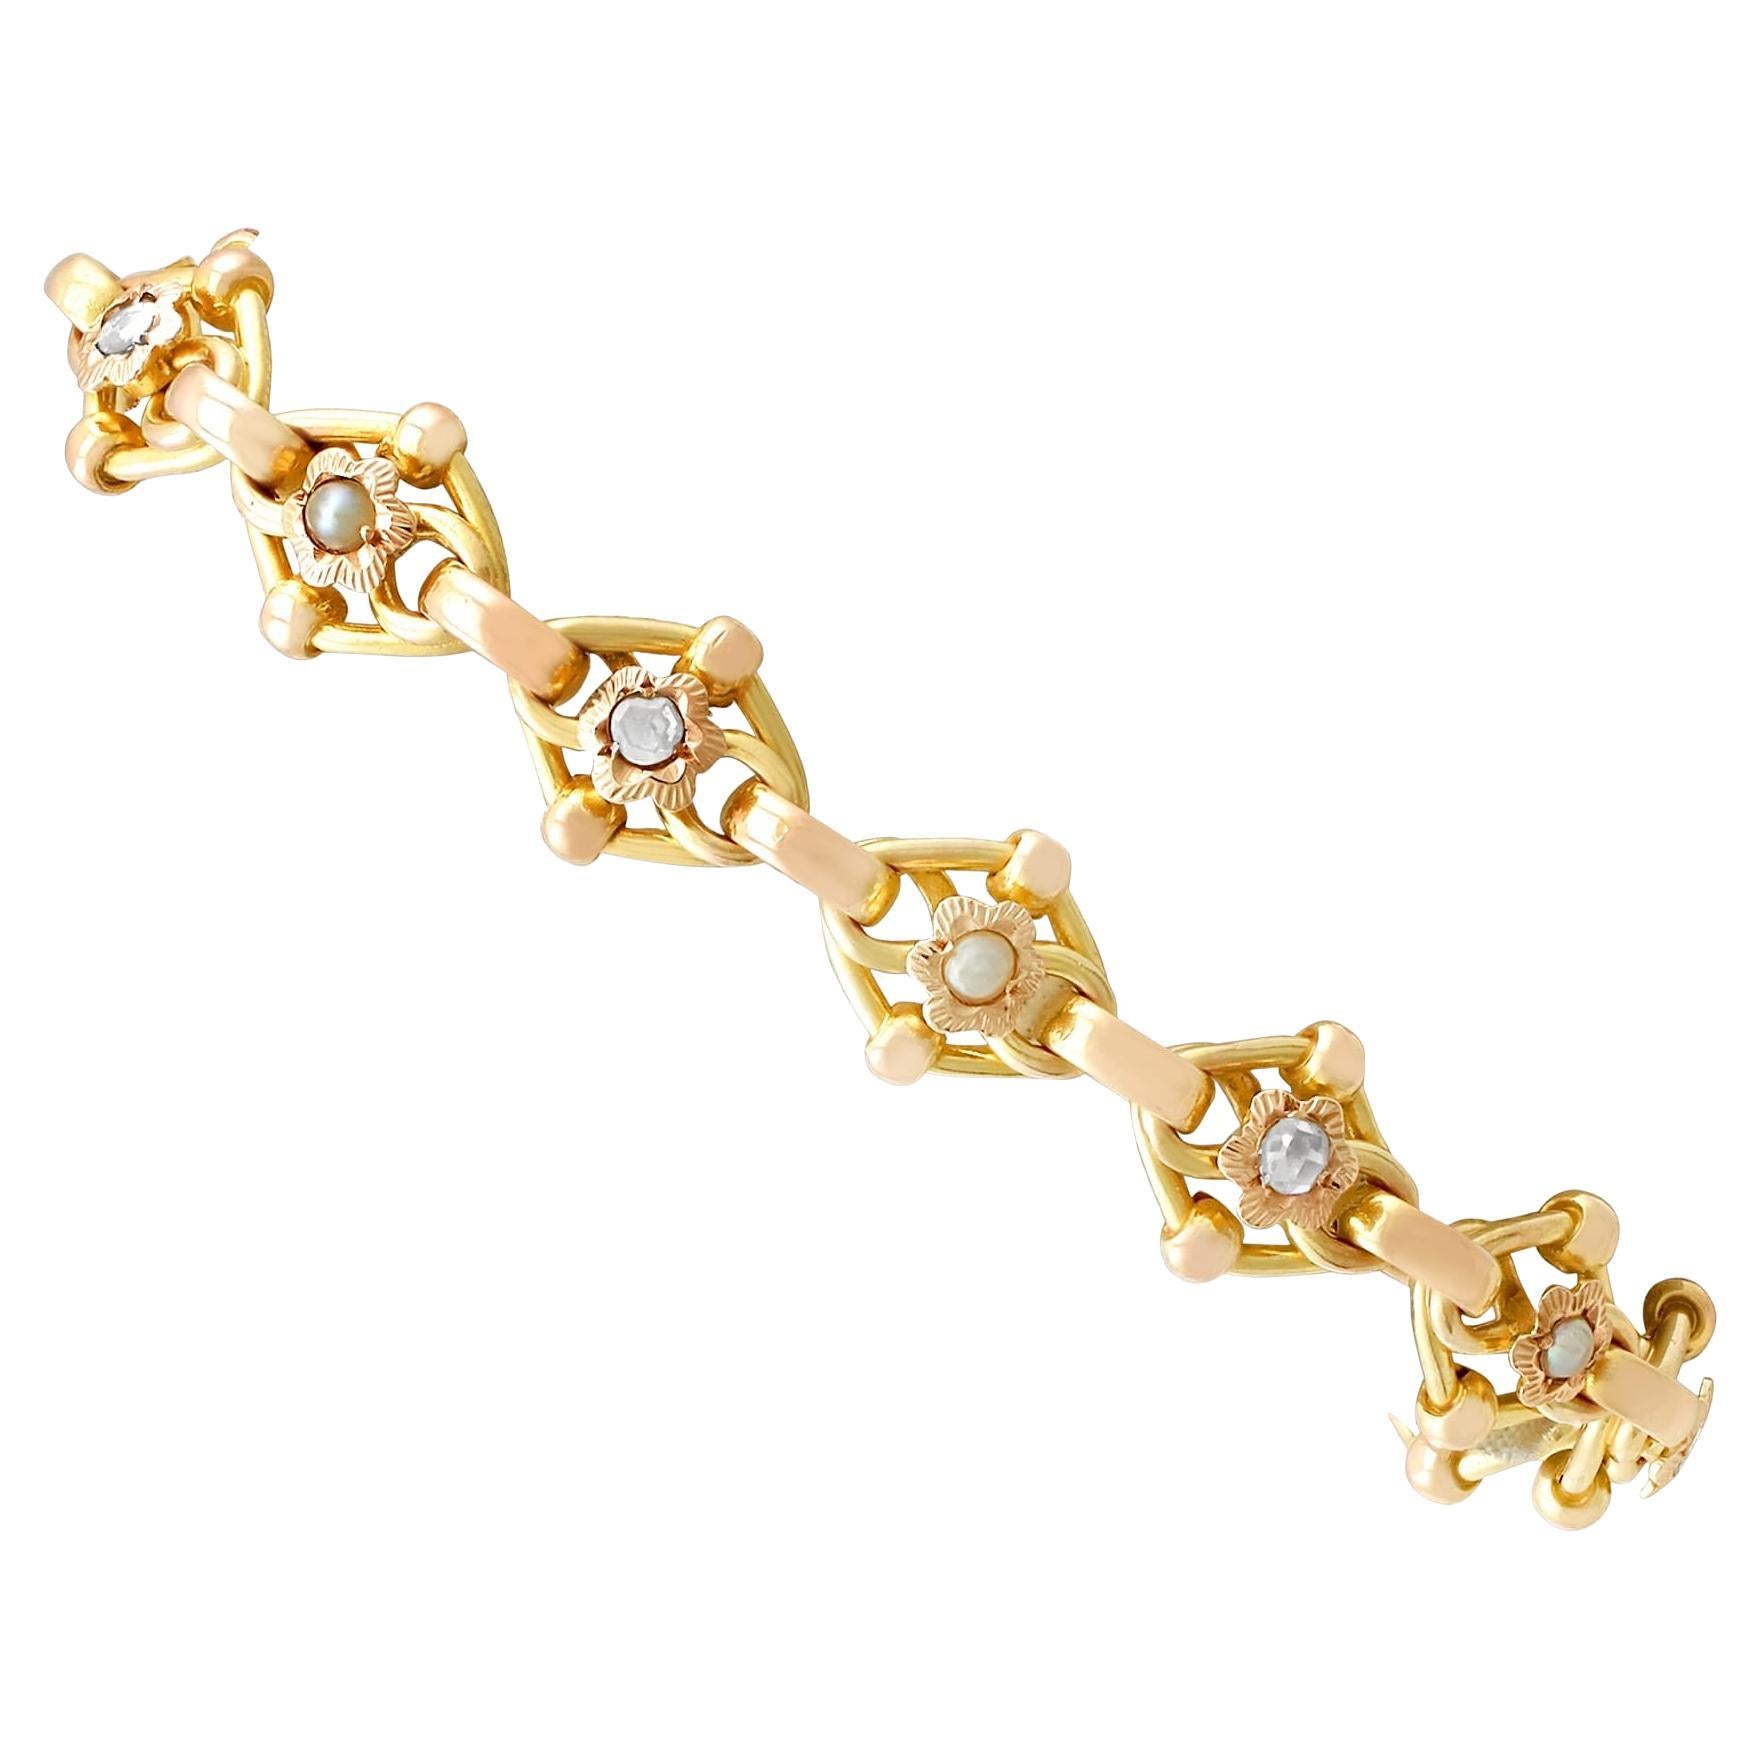 1910s 2.61 Carat Diamond and Seed Pearl Yellow Gold Bracelet For Sale